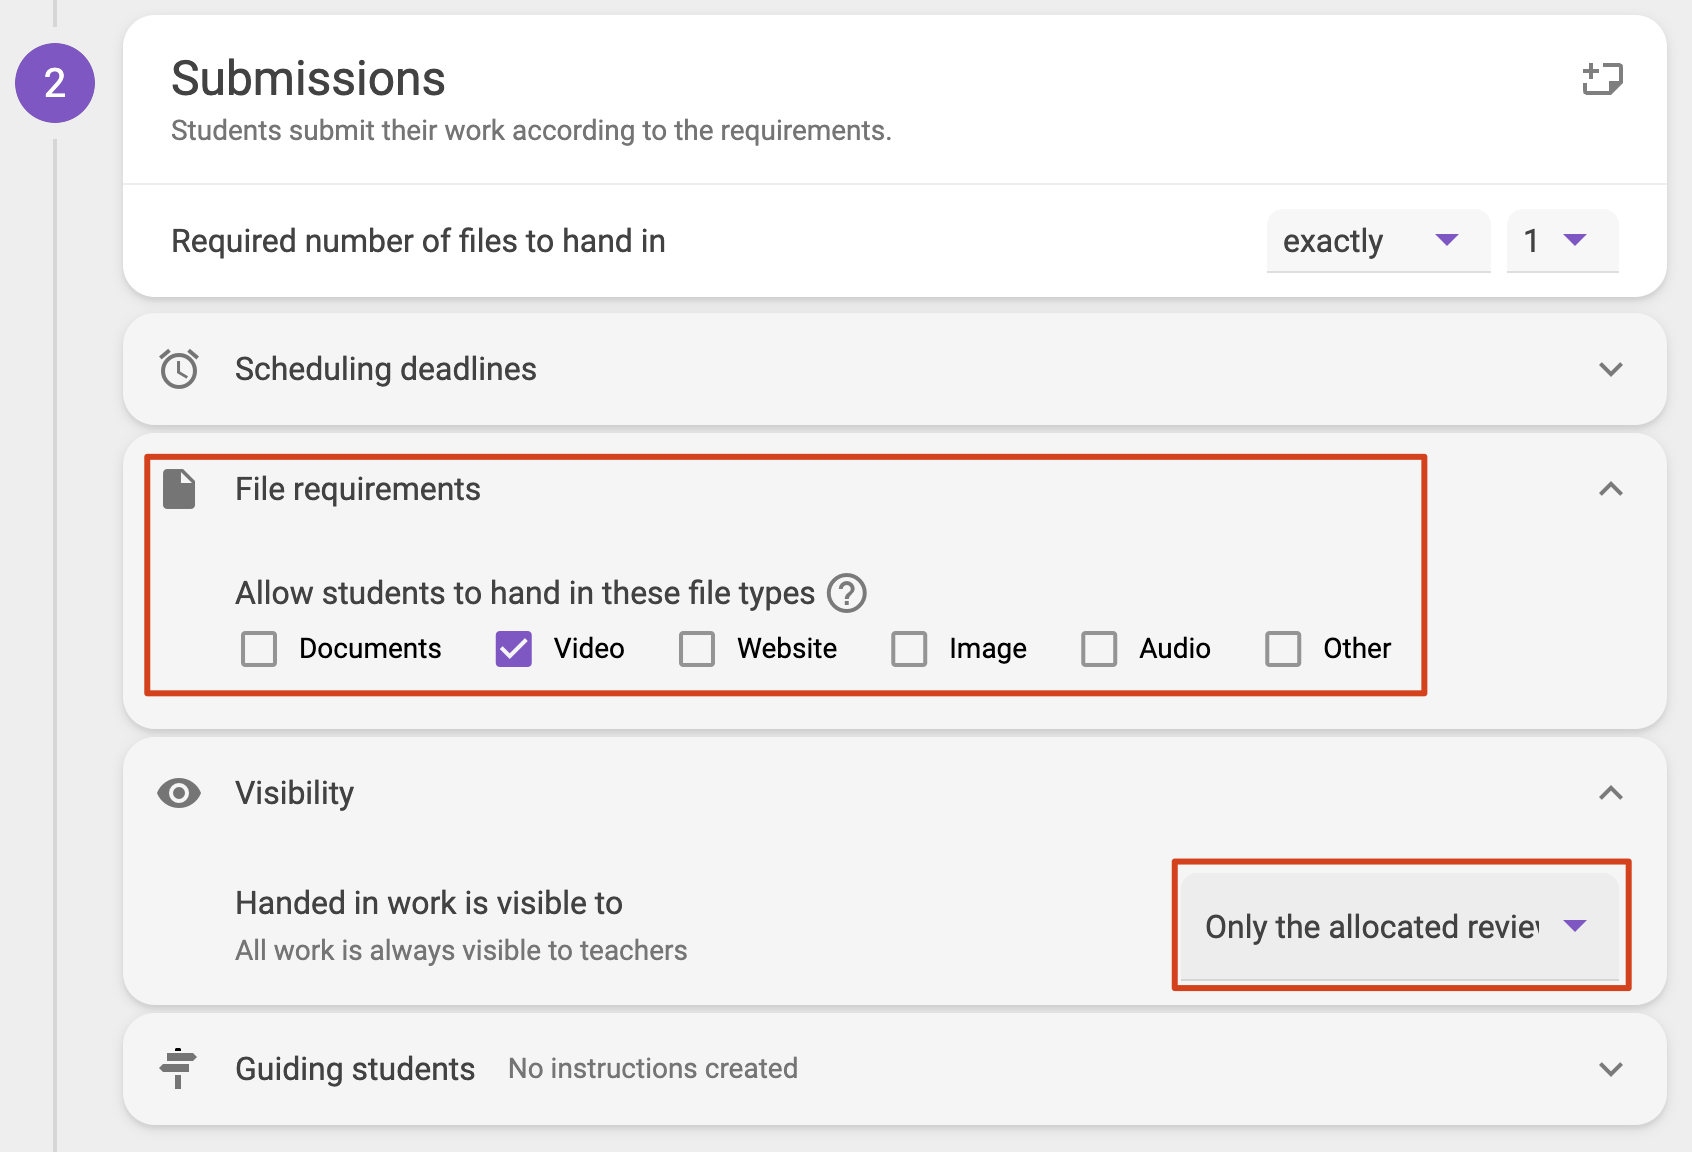 The second step in the FeedbackFruits activity is where detailed submissions settings needs to be configured